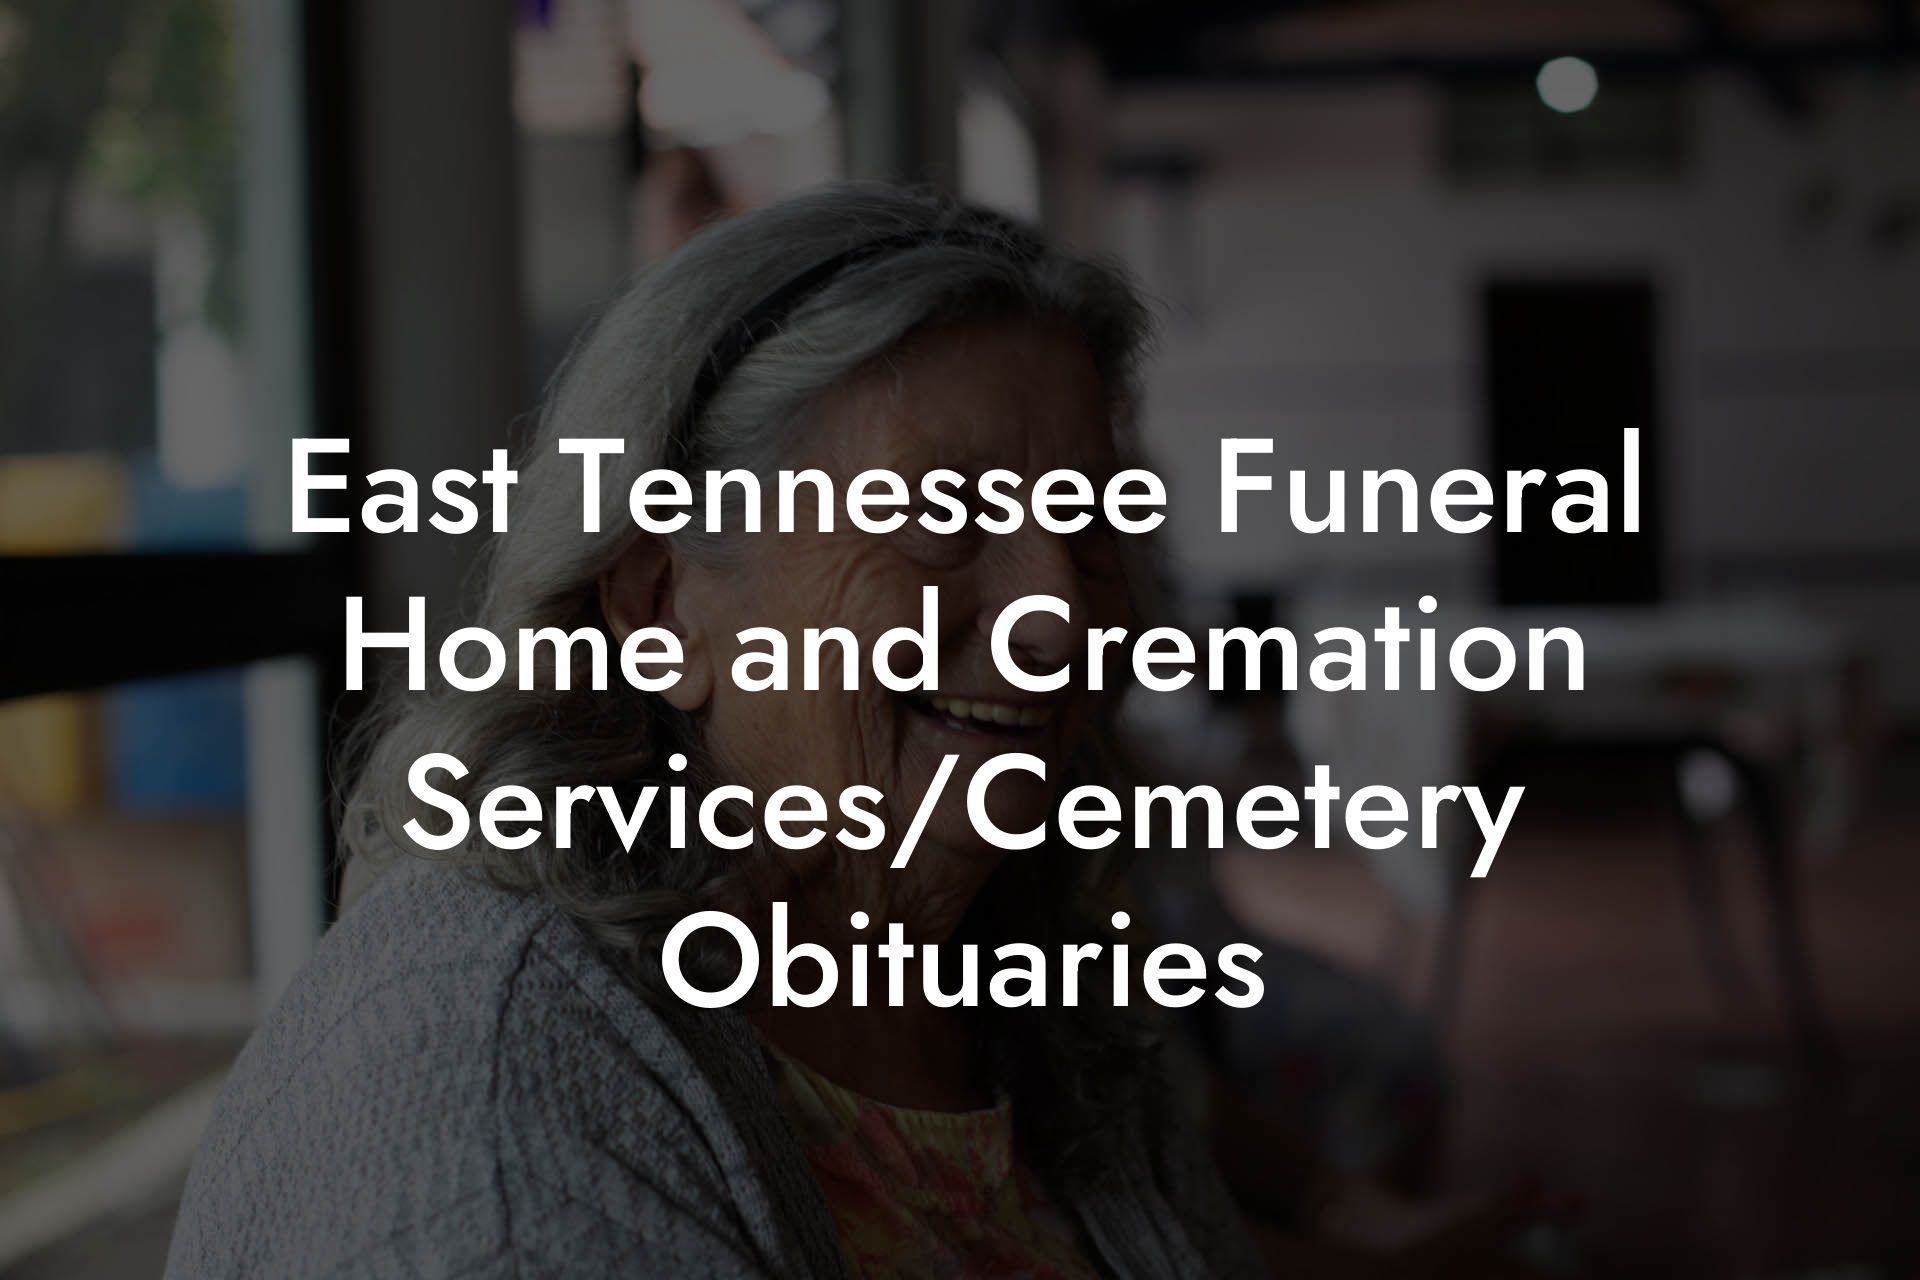 East Tennessee Funeral Home and Cremation Services/Cemetery Obituaries